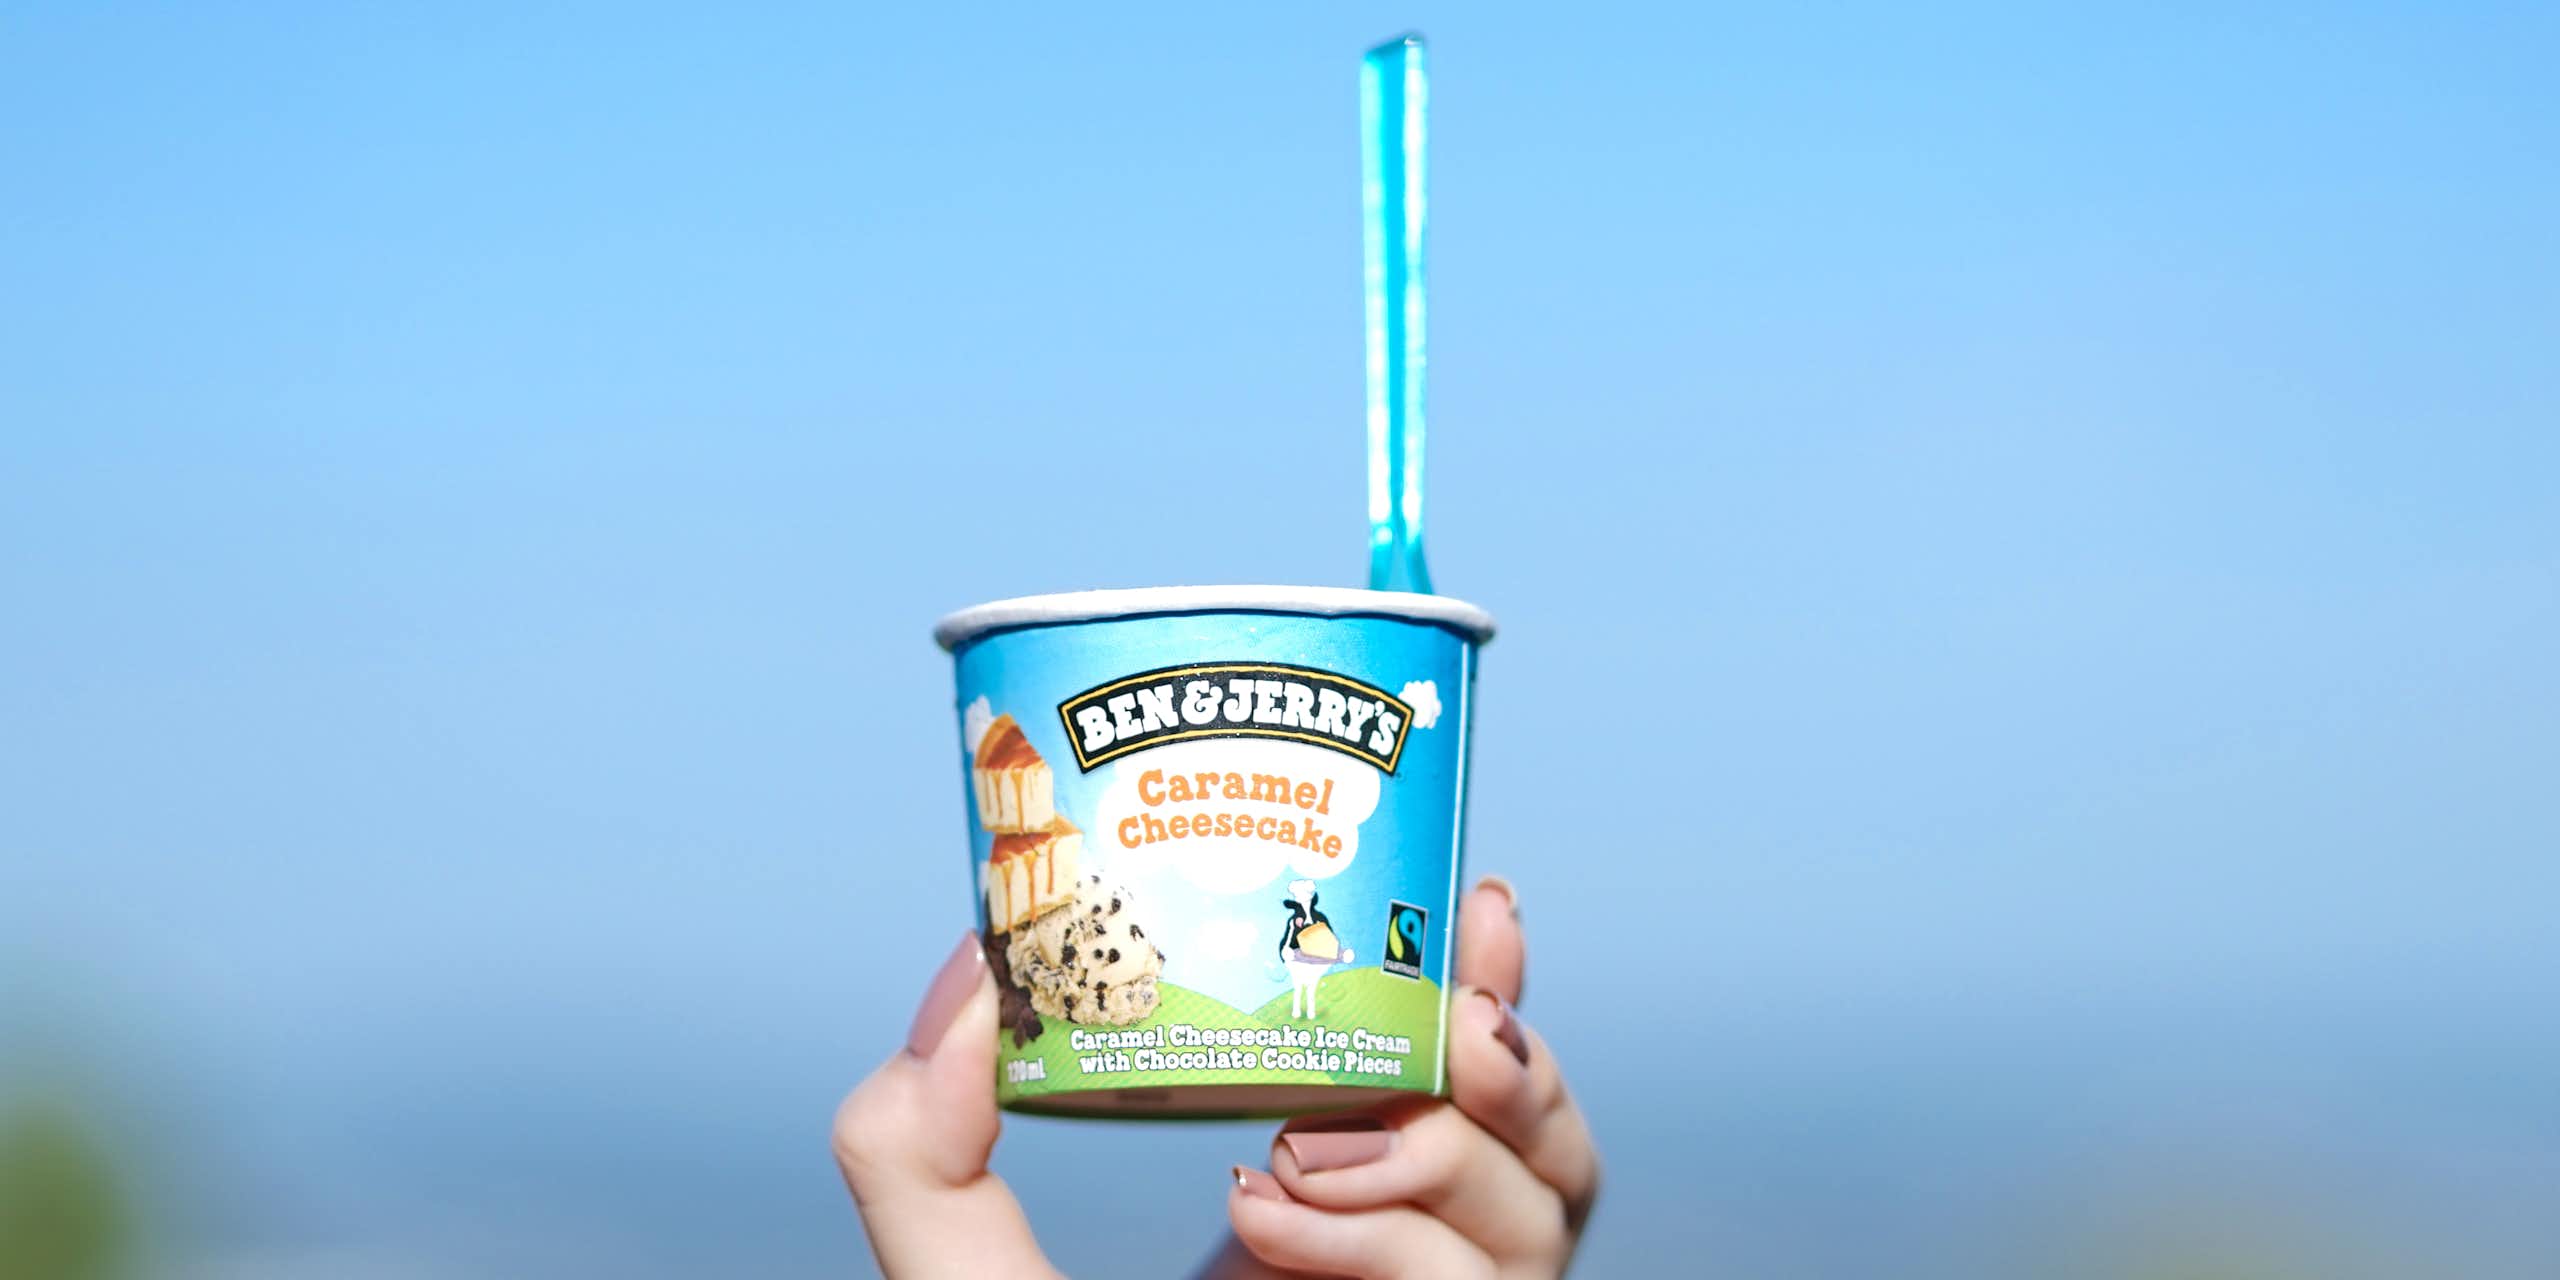 Tub of Ben & Jerry's being held up against the sky